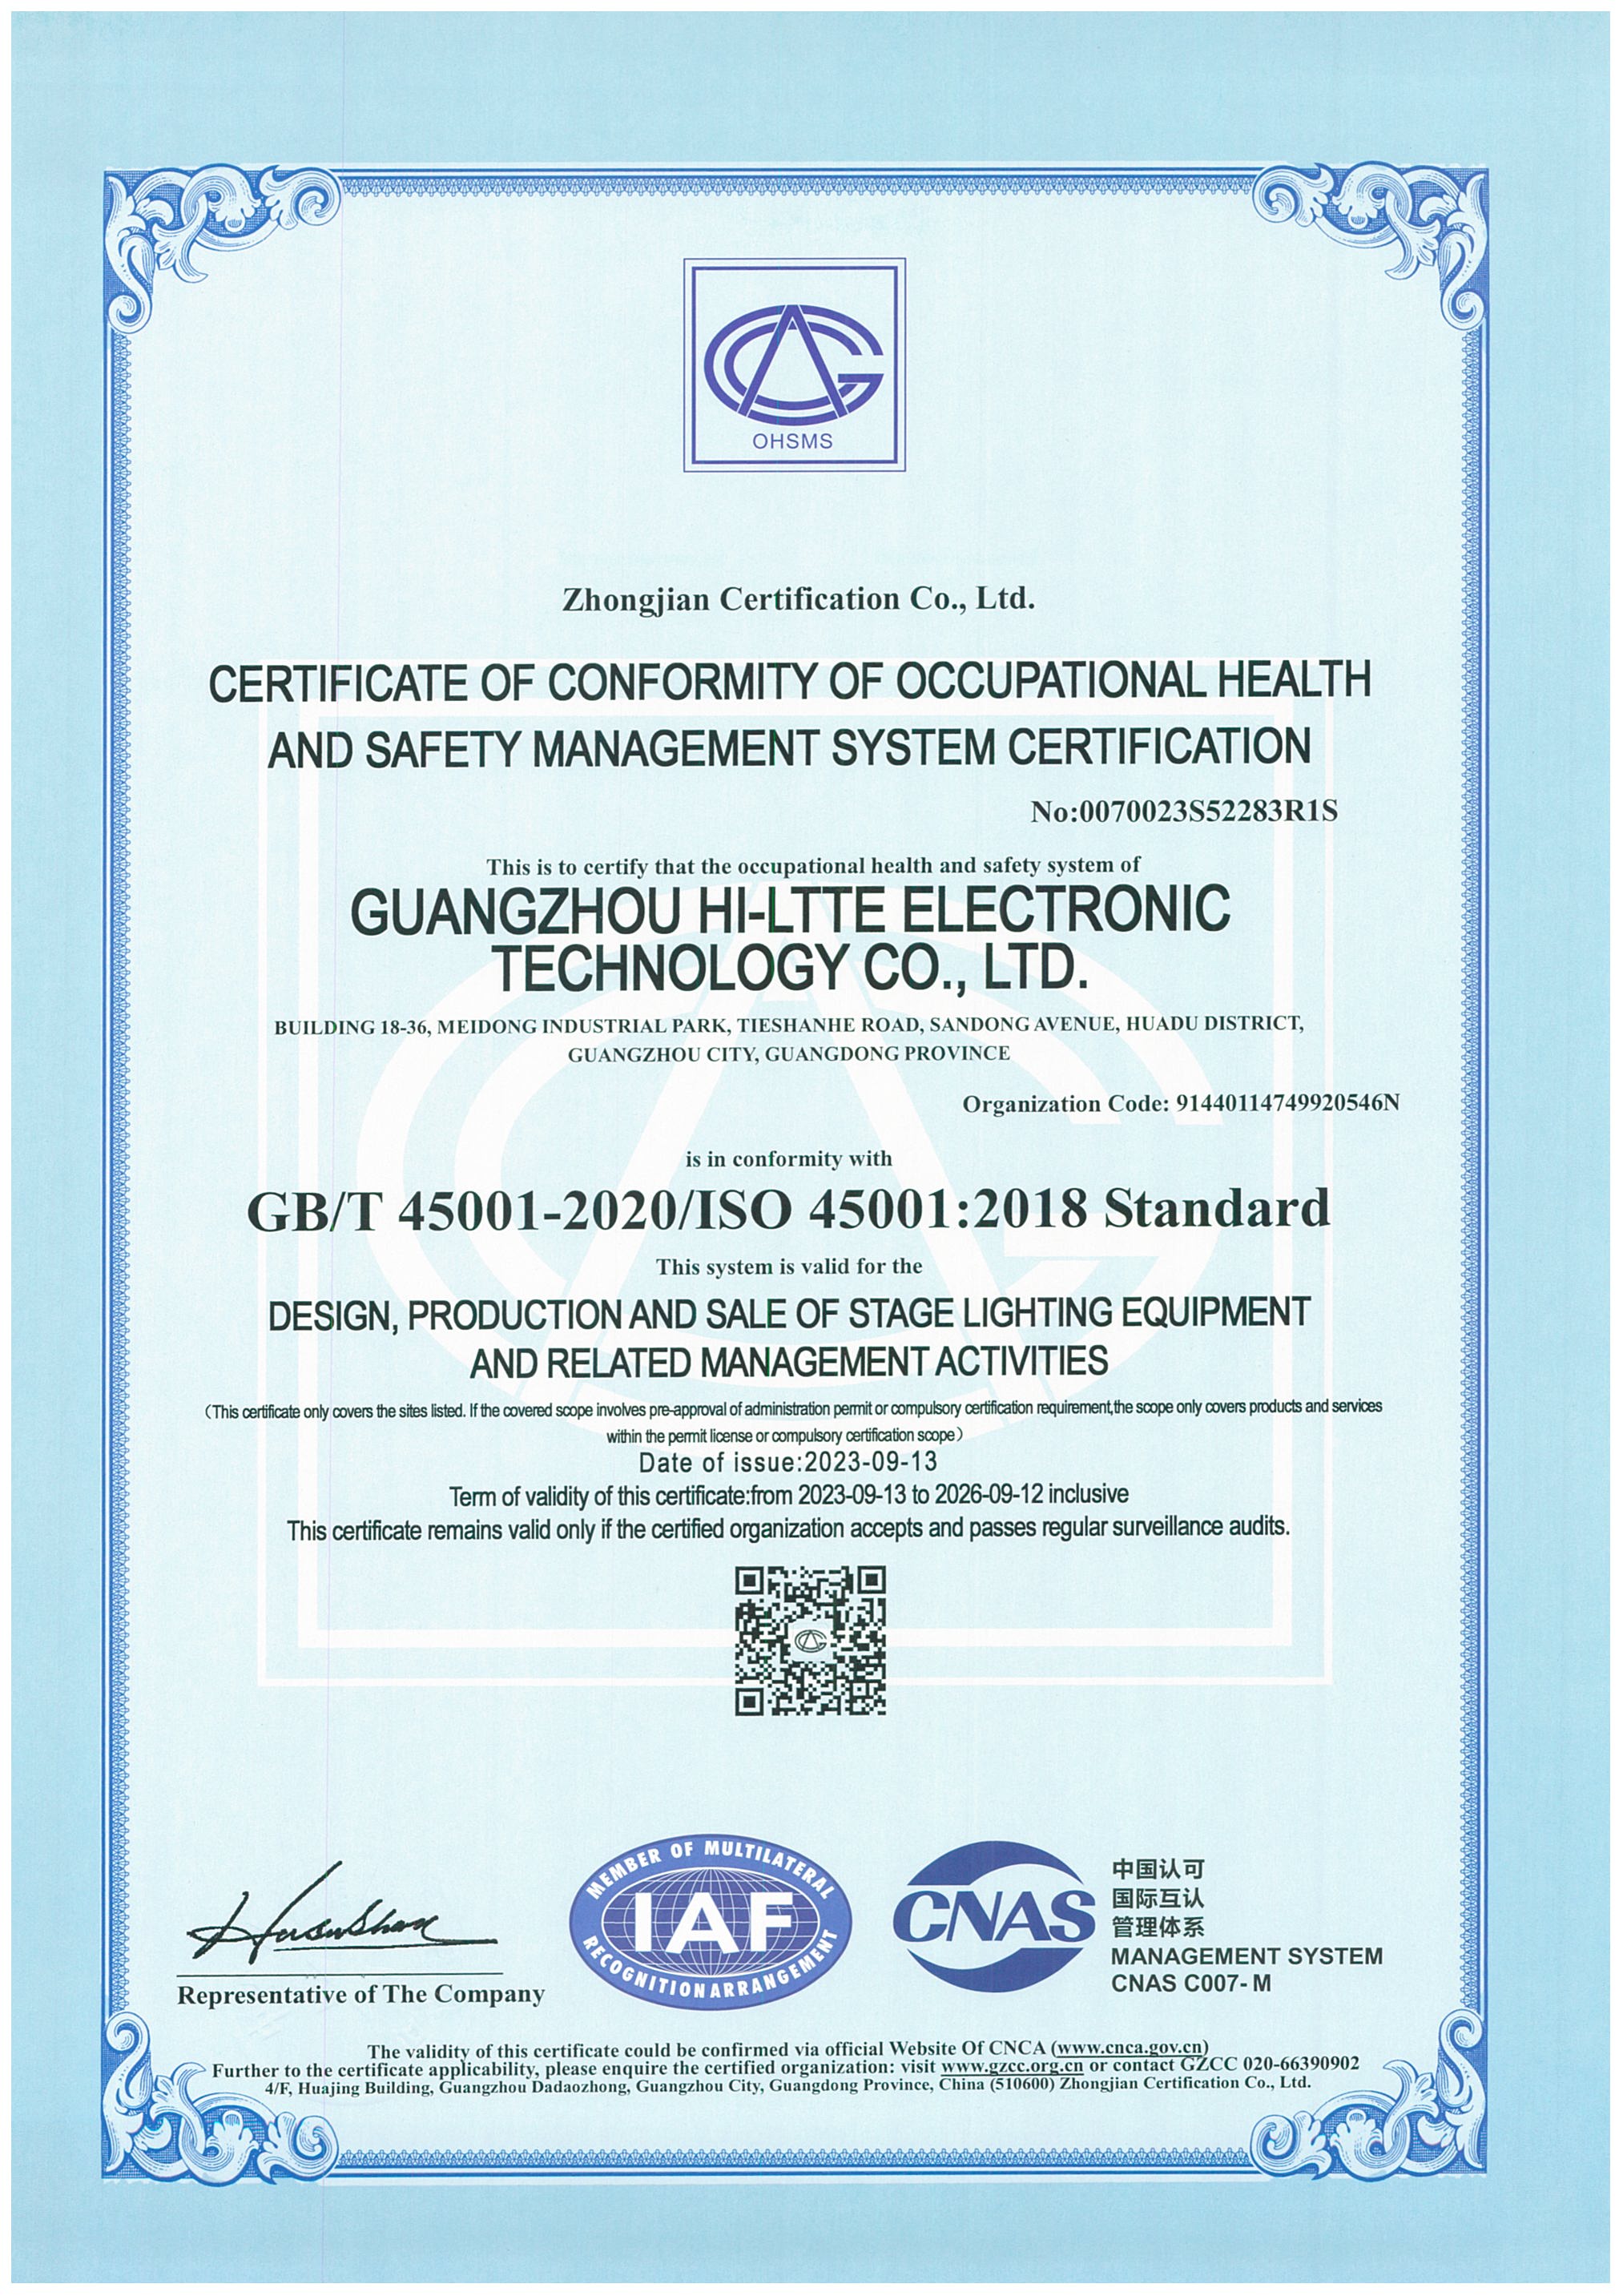 CERTIFICATE OF CONFORMITY OF OCCUPATIONAL HEALTH AND SAFETY MANAGEMENT SYSTEM CERTIFICATION